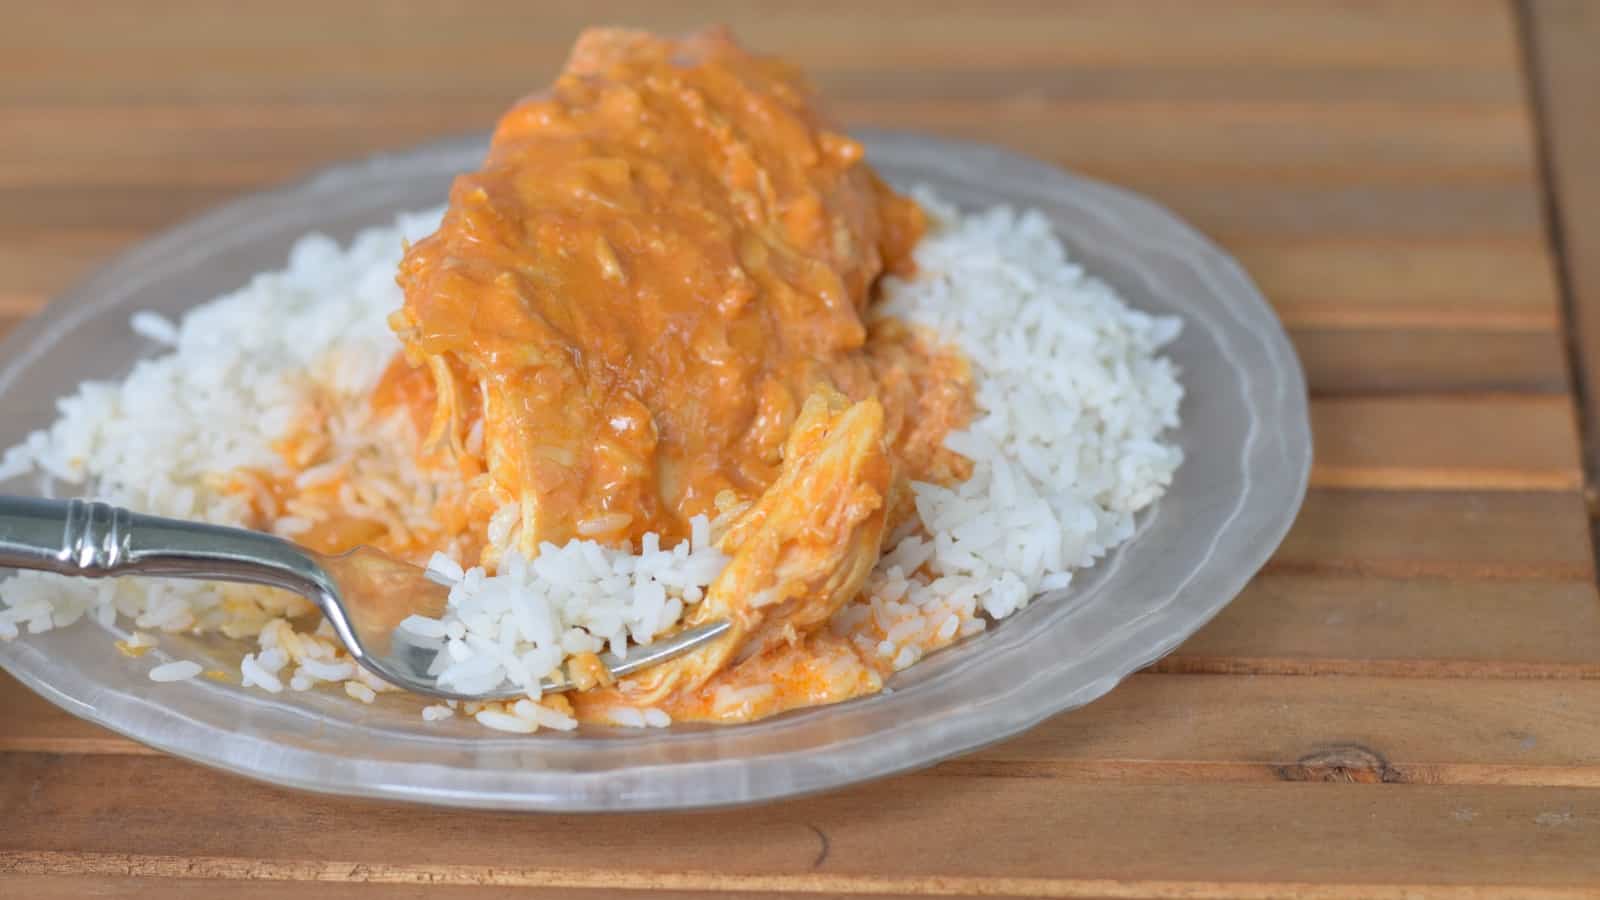 Image shows Bite of chicken paprikash on a fork sitting on a glass plate on a wooden table.